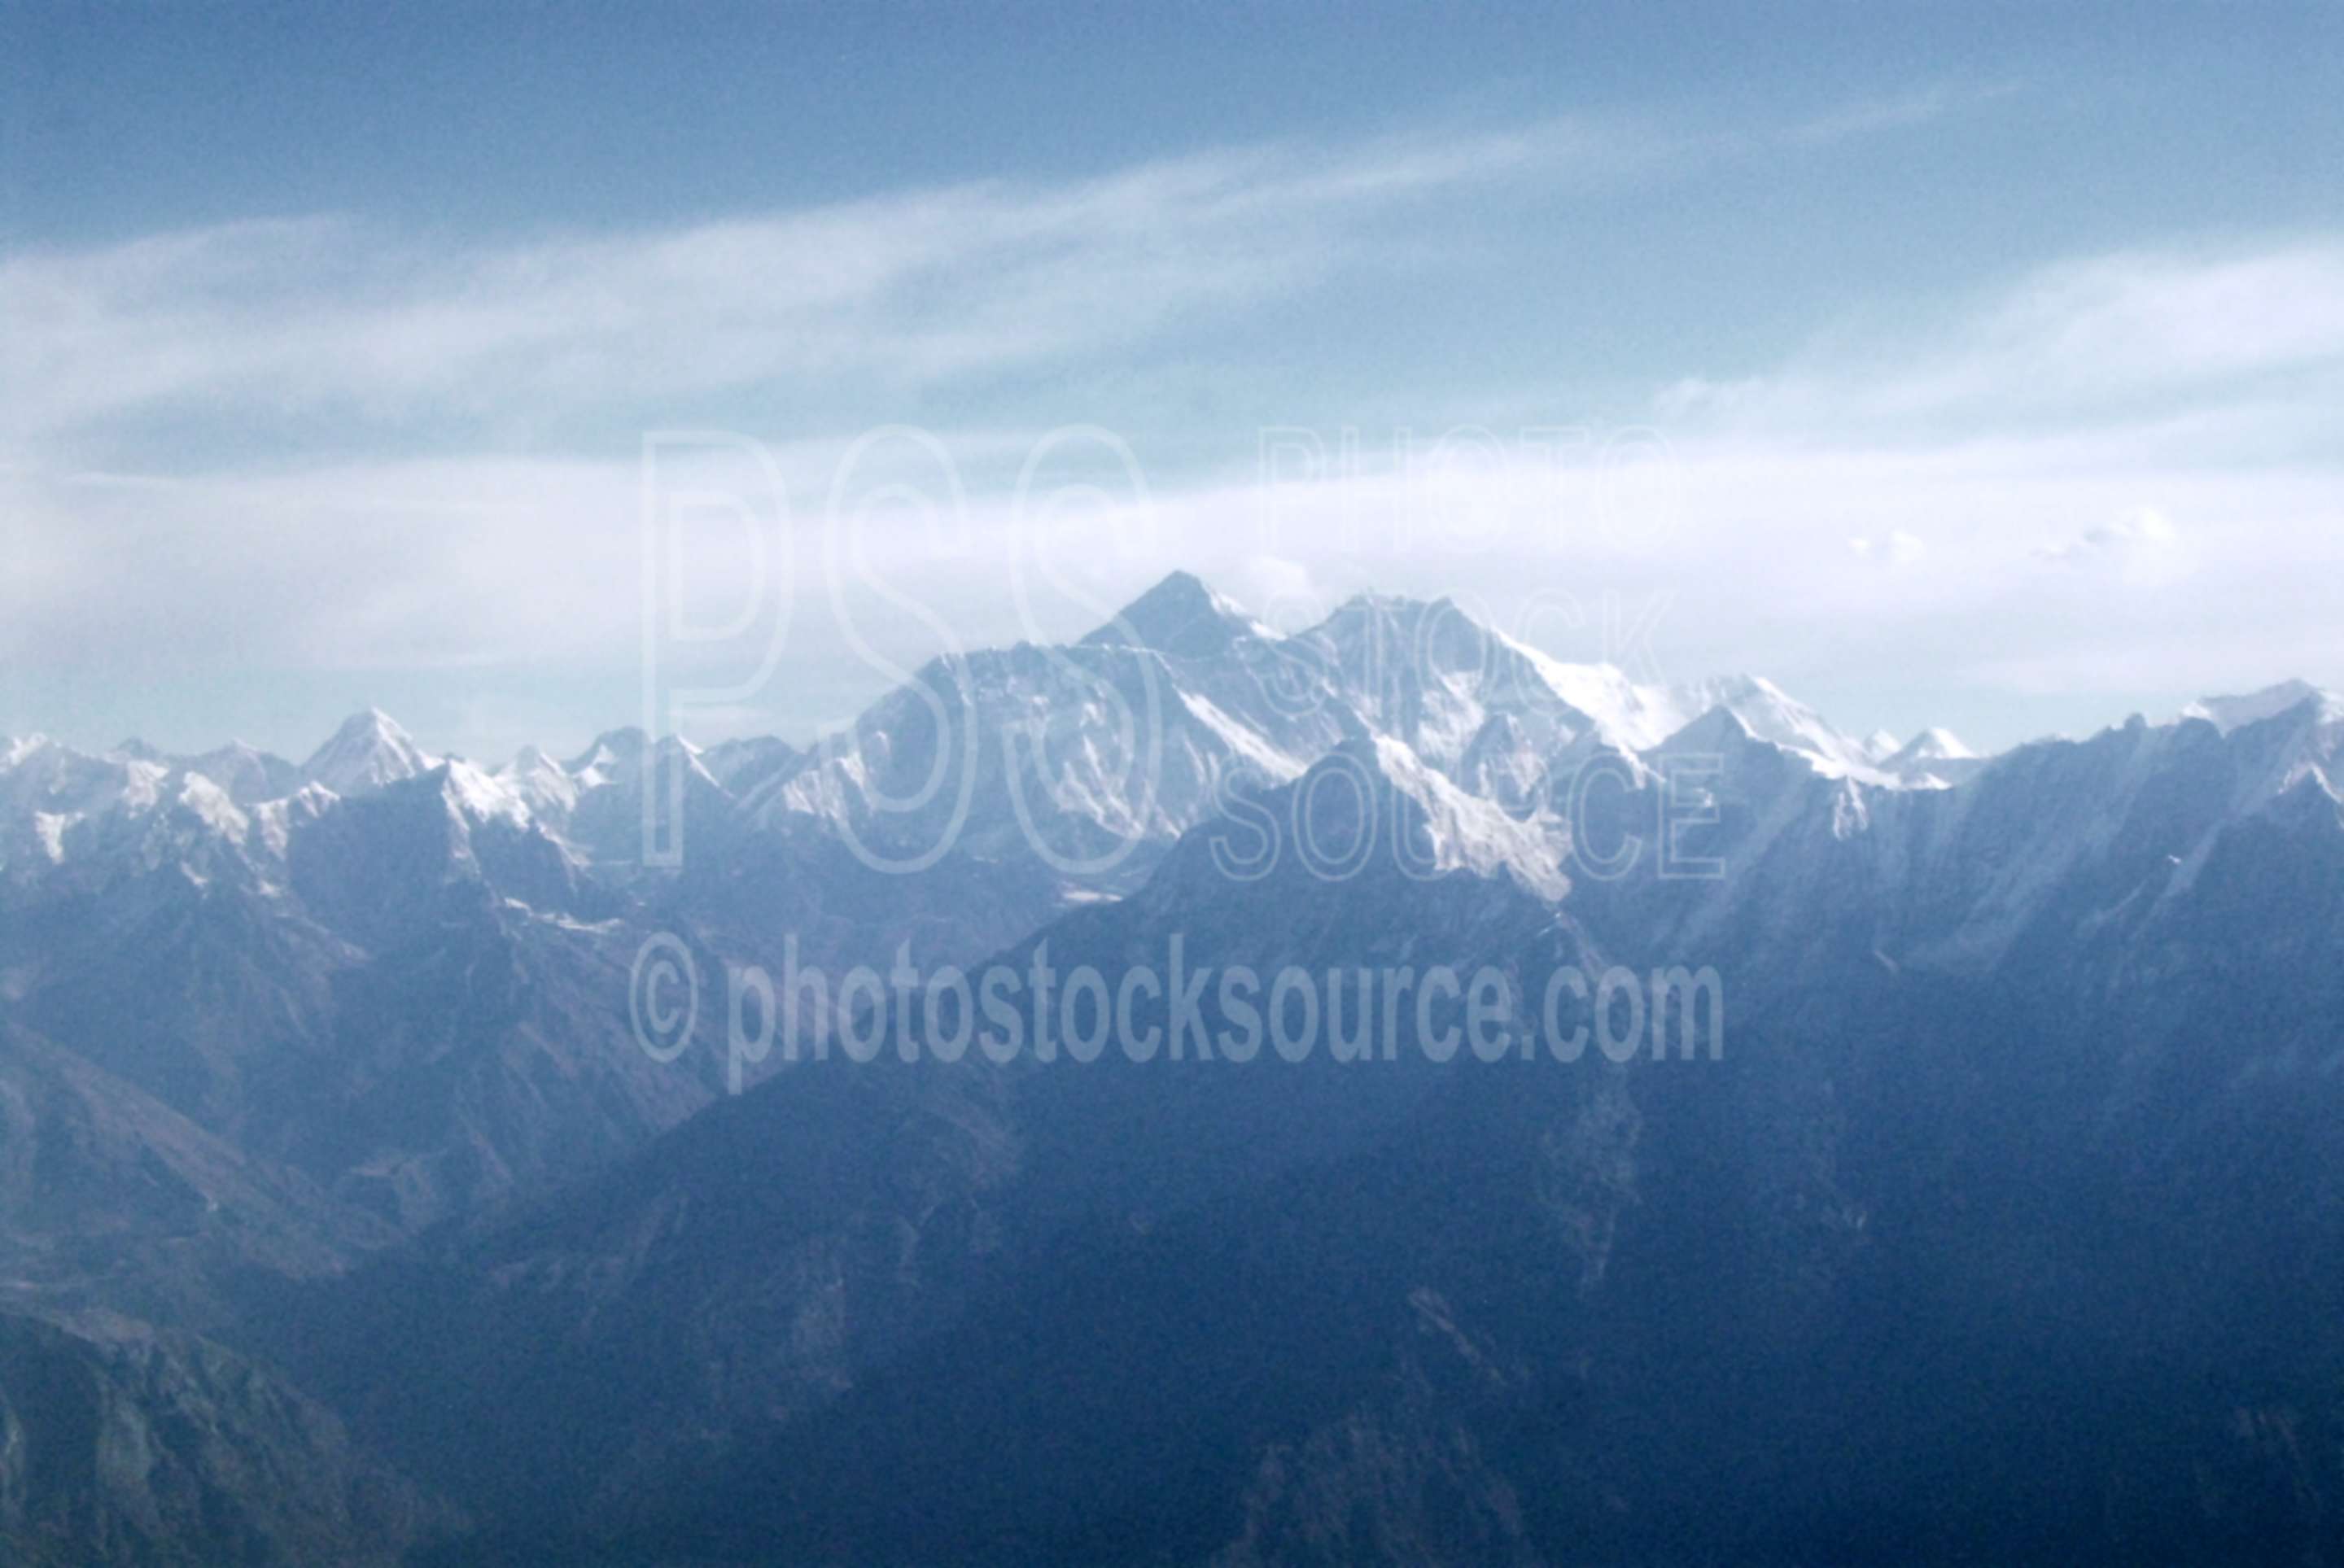 Mt. Everest in the Himalayas,aerial,flying,mountains,himalayas,mountain range,panorama,nature,aerials